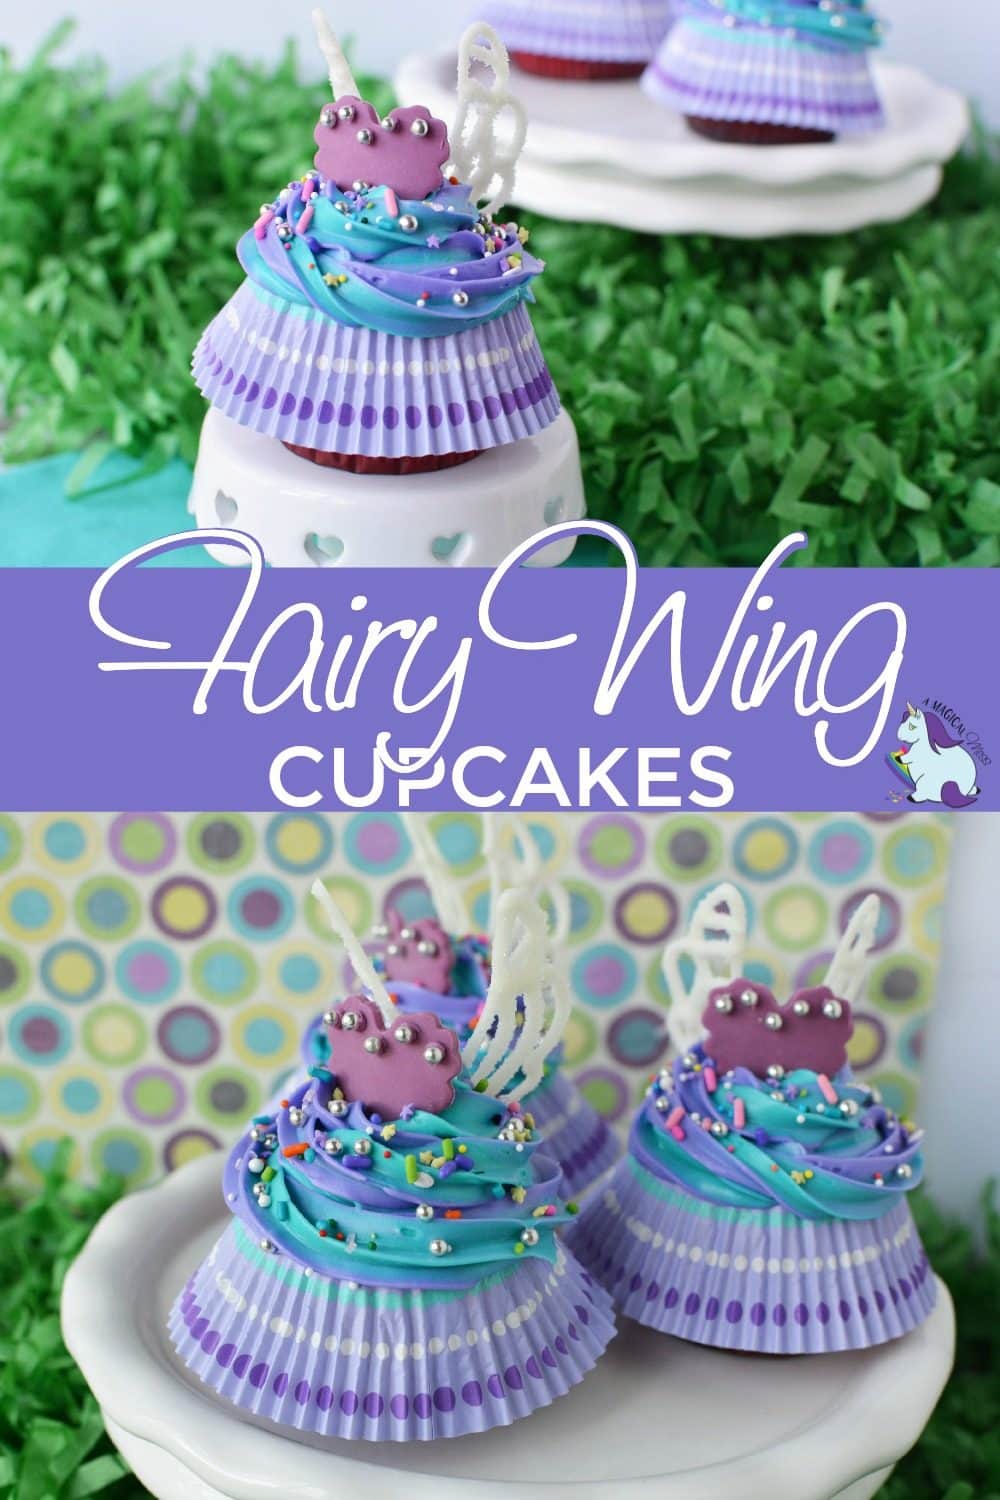 Cupcakes with skirts and wings on little stands.